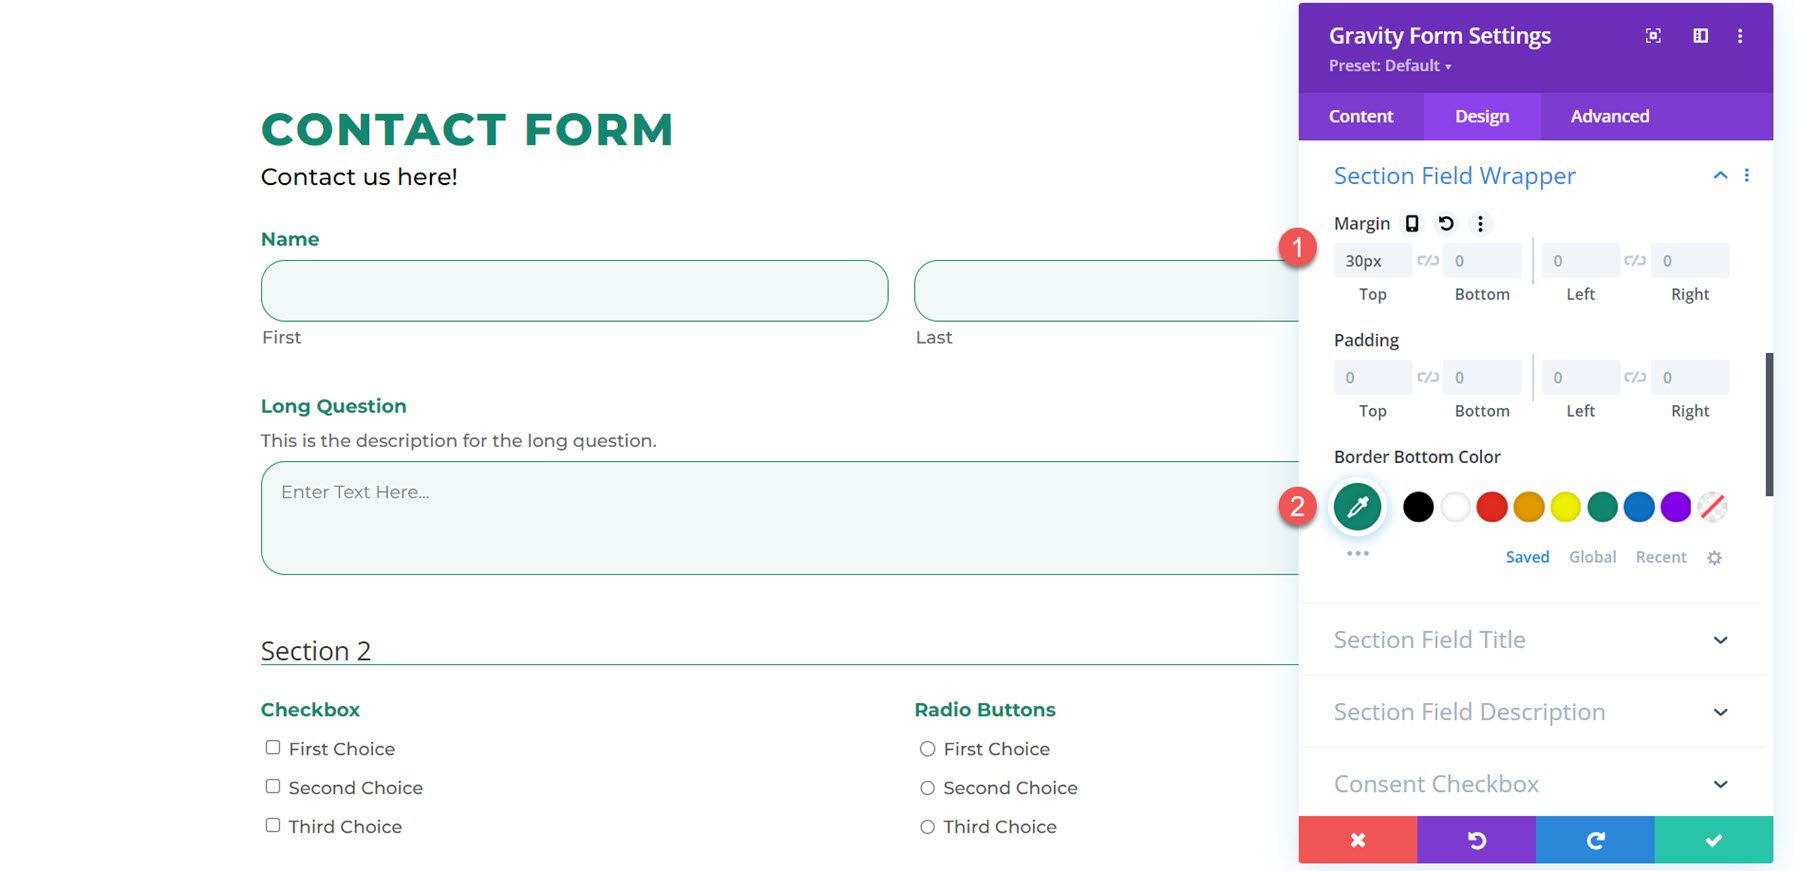 Divi Plugin Highlight Divi Gravity Forms Section Field Wrapper